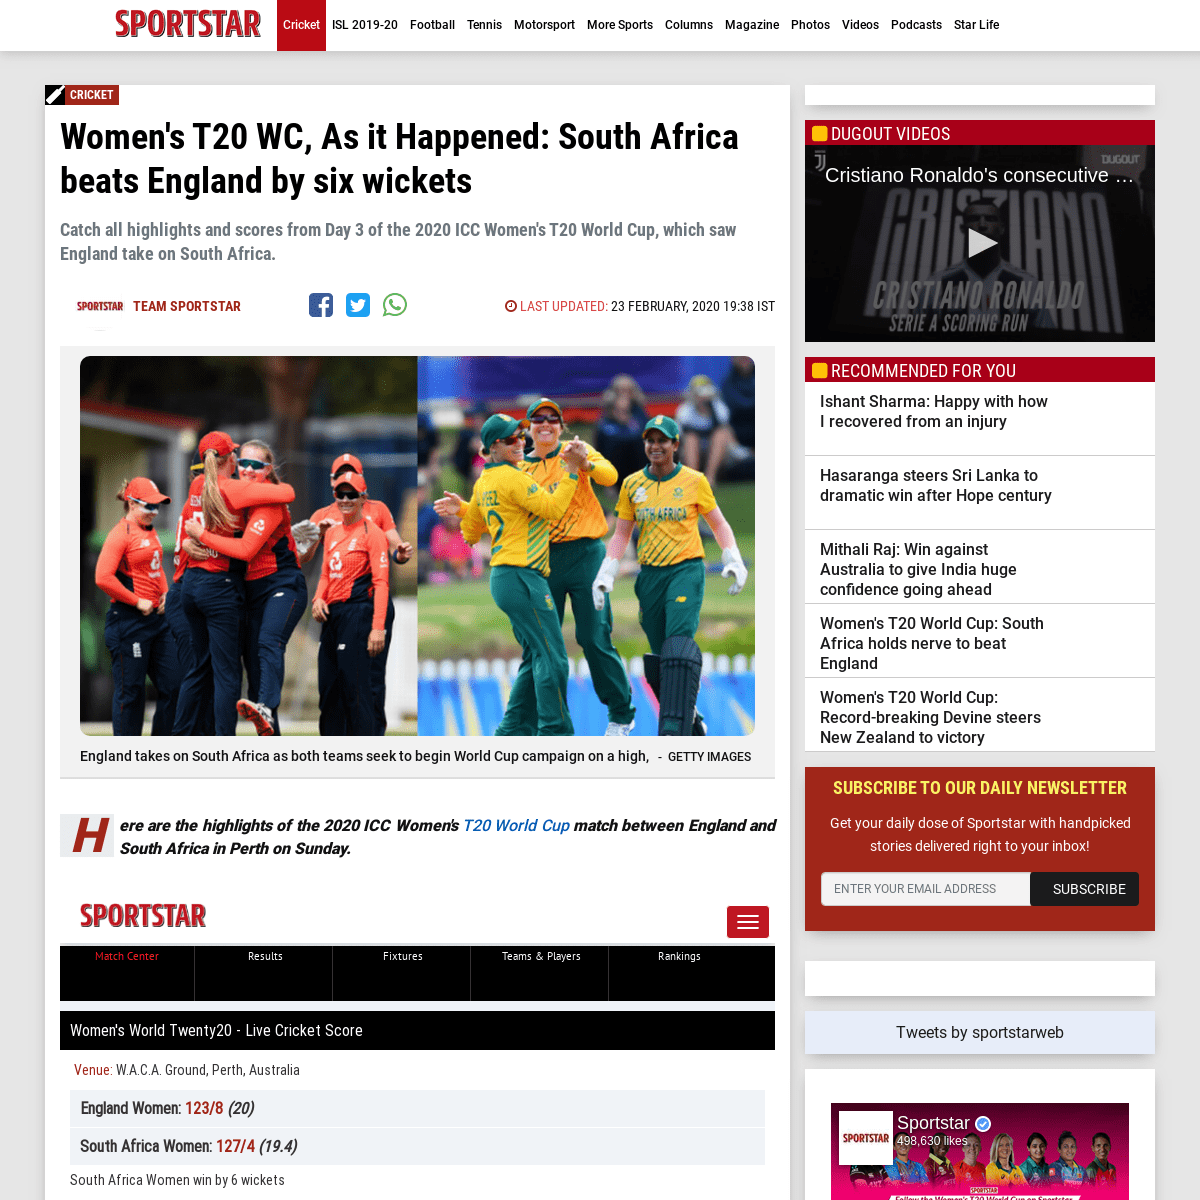 A complete backup of sportstar.thehindu.com/cricket/womens-t20-world-cup-england-vs-south-africa-live-streaming-score-commentary